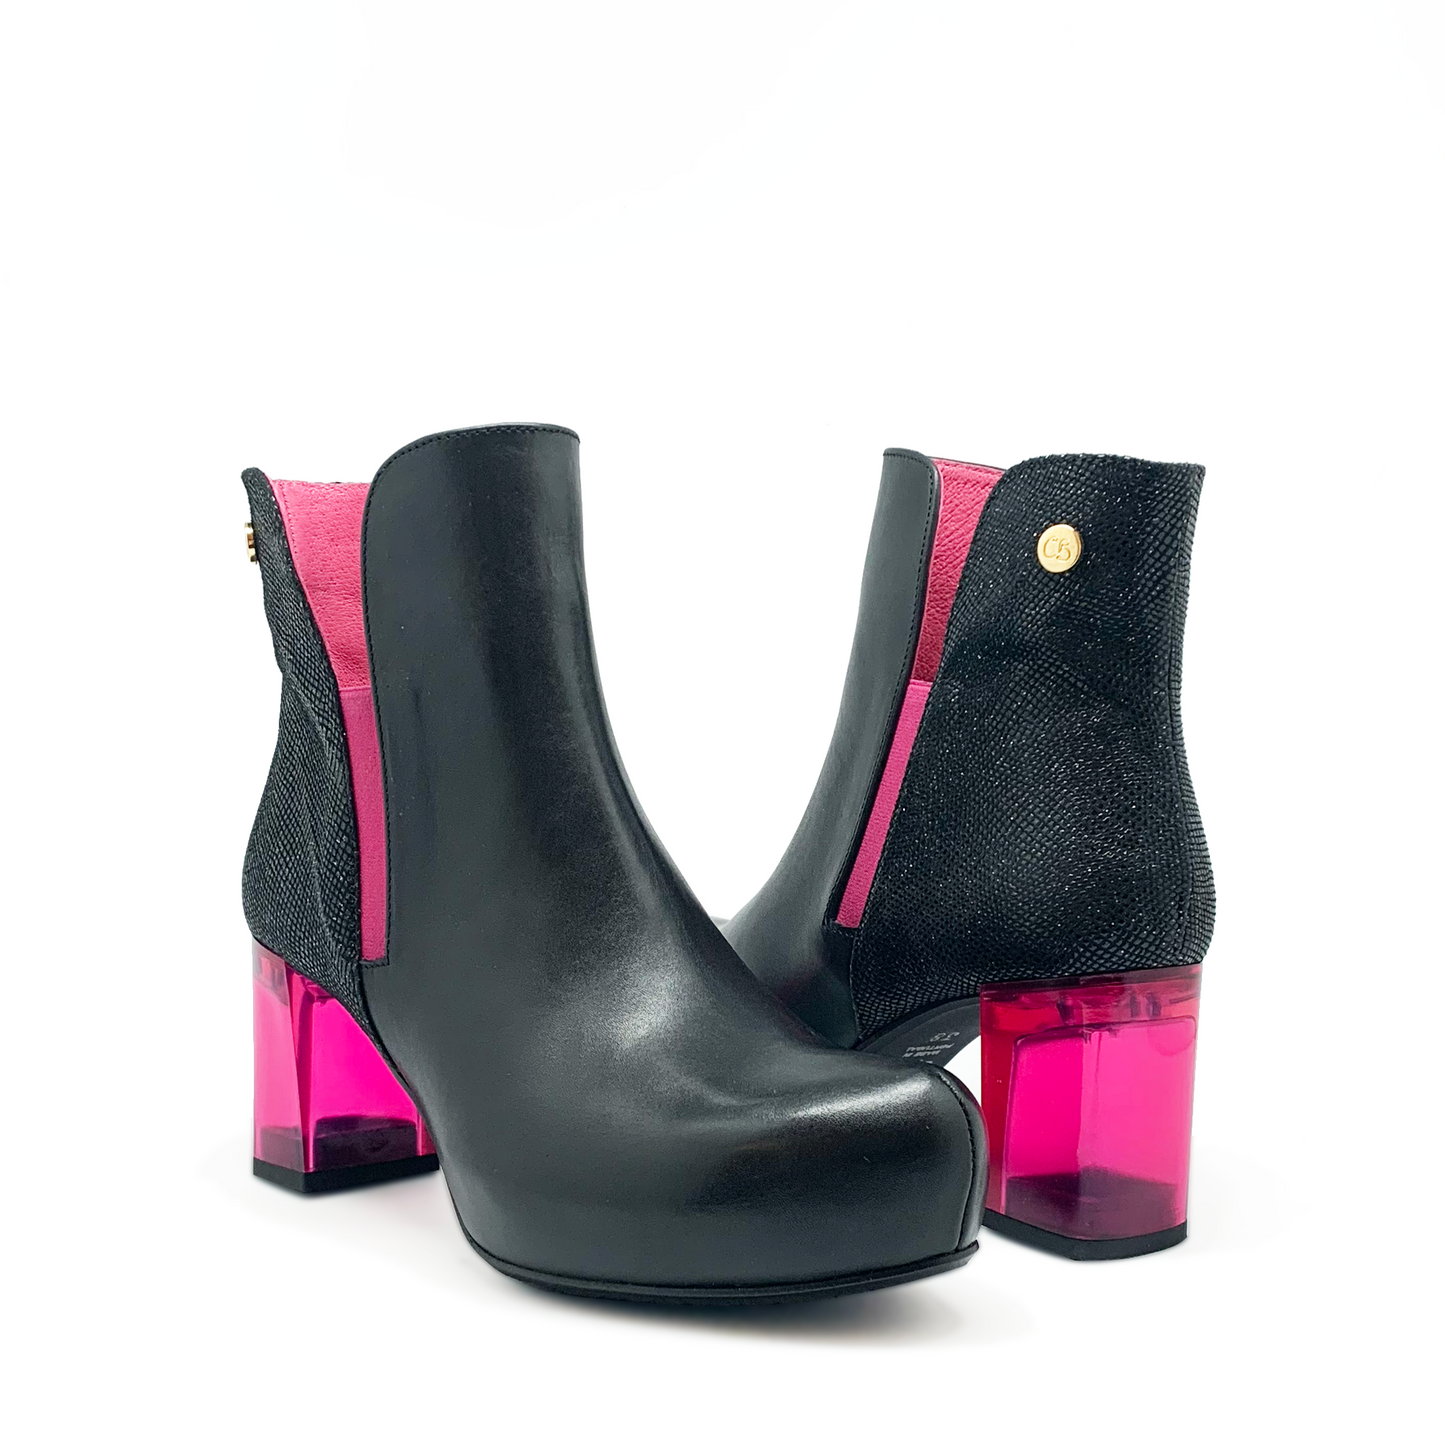 Canal -Ankle boot Black/Fuchsia